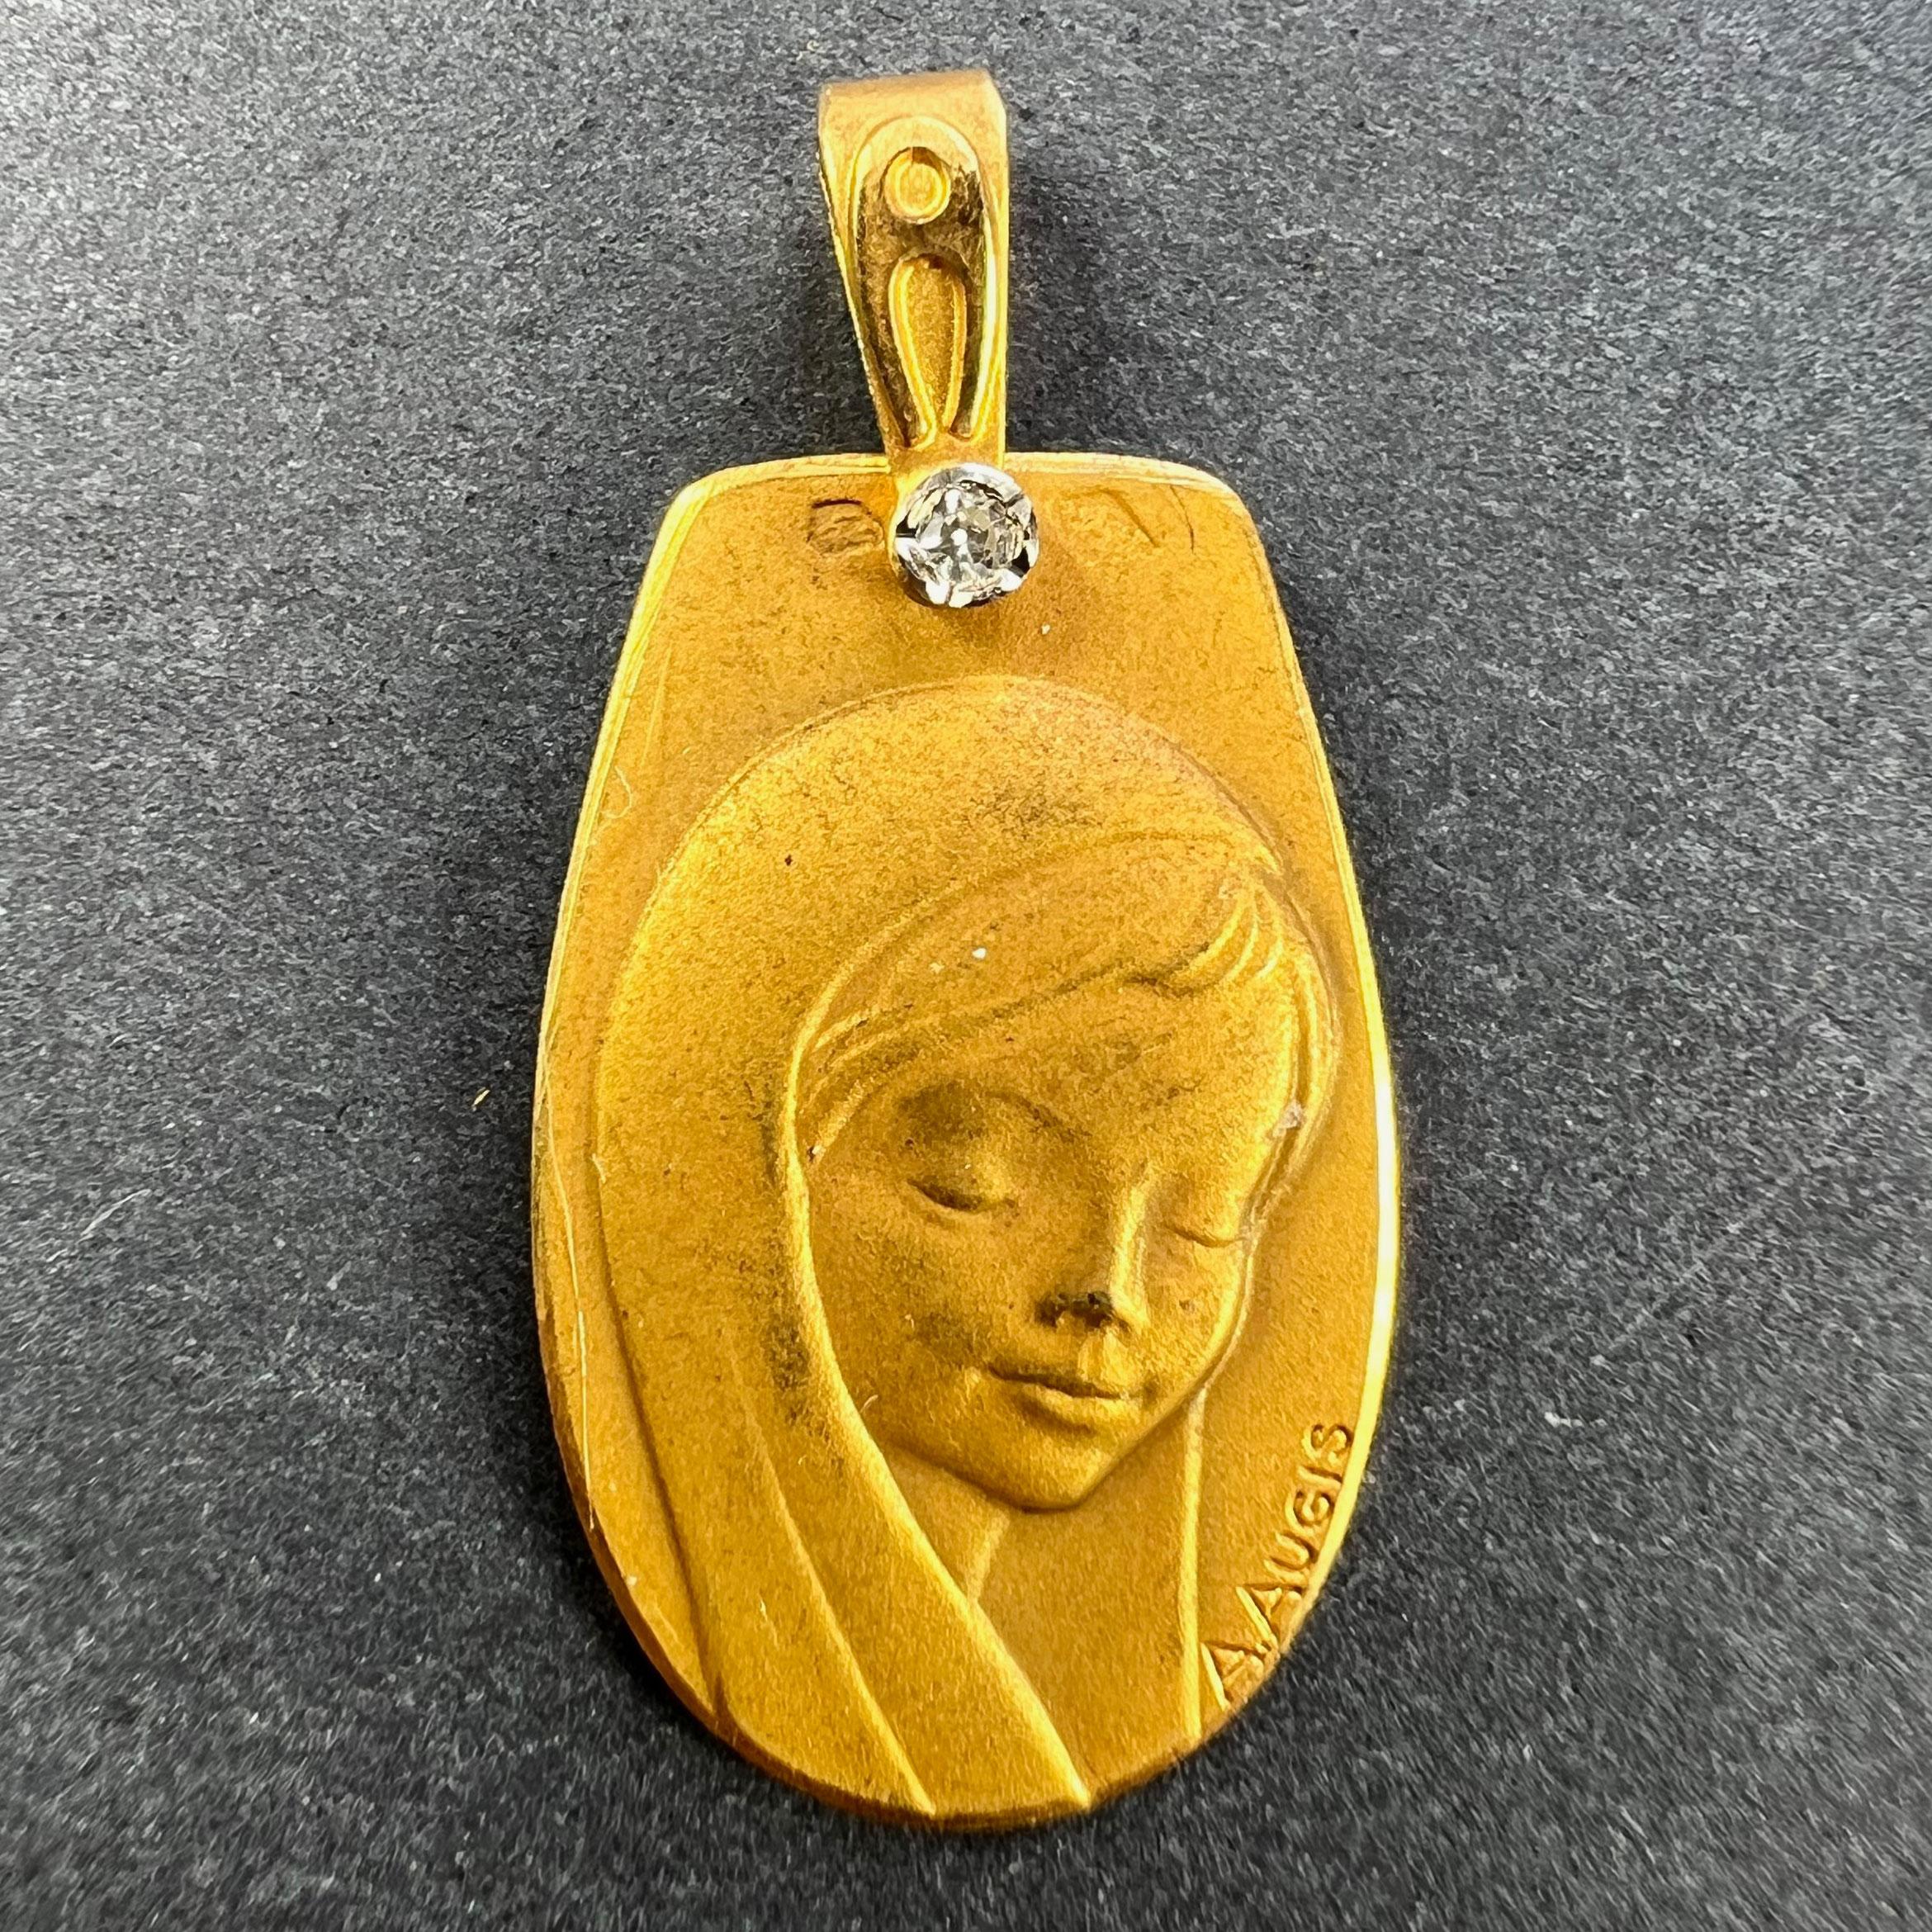 A French 18 karat (18K) yellow gold pendant designed as an oval medal depicting the Virgin Mary set to the pendant bail with a single-cut diamond weighing approximately 0.05 carats. Signed A.Augis. Stamped with the eagle’s head for French